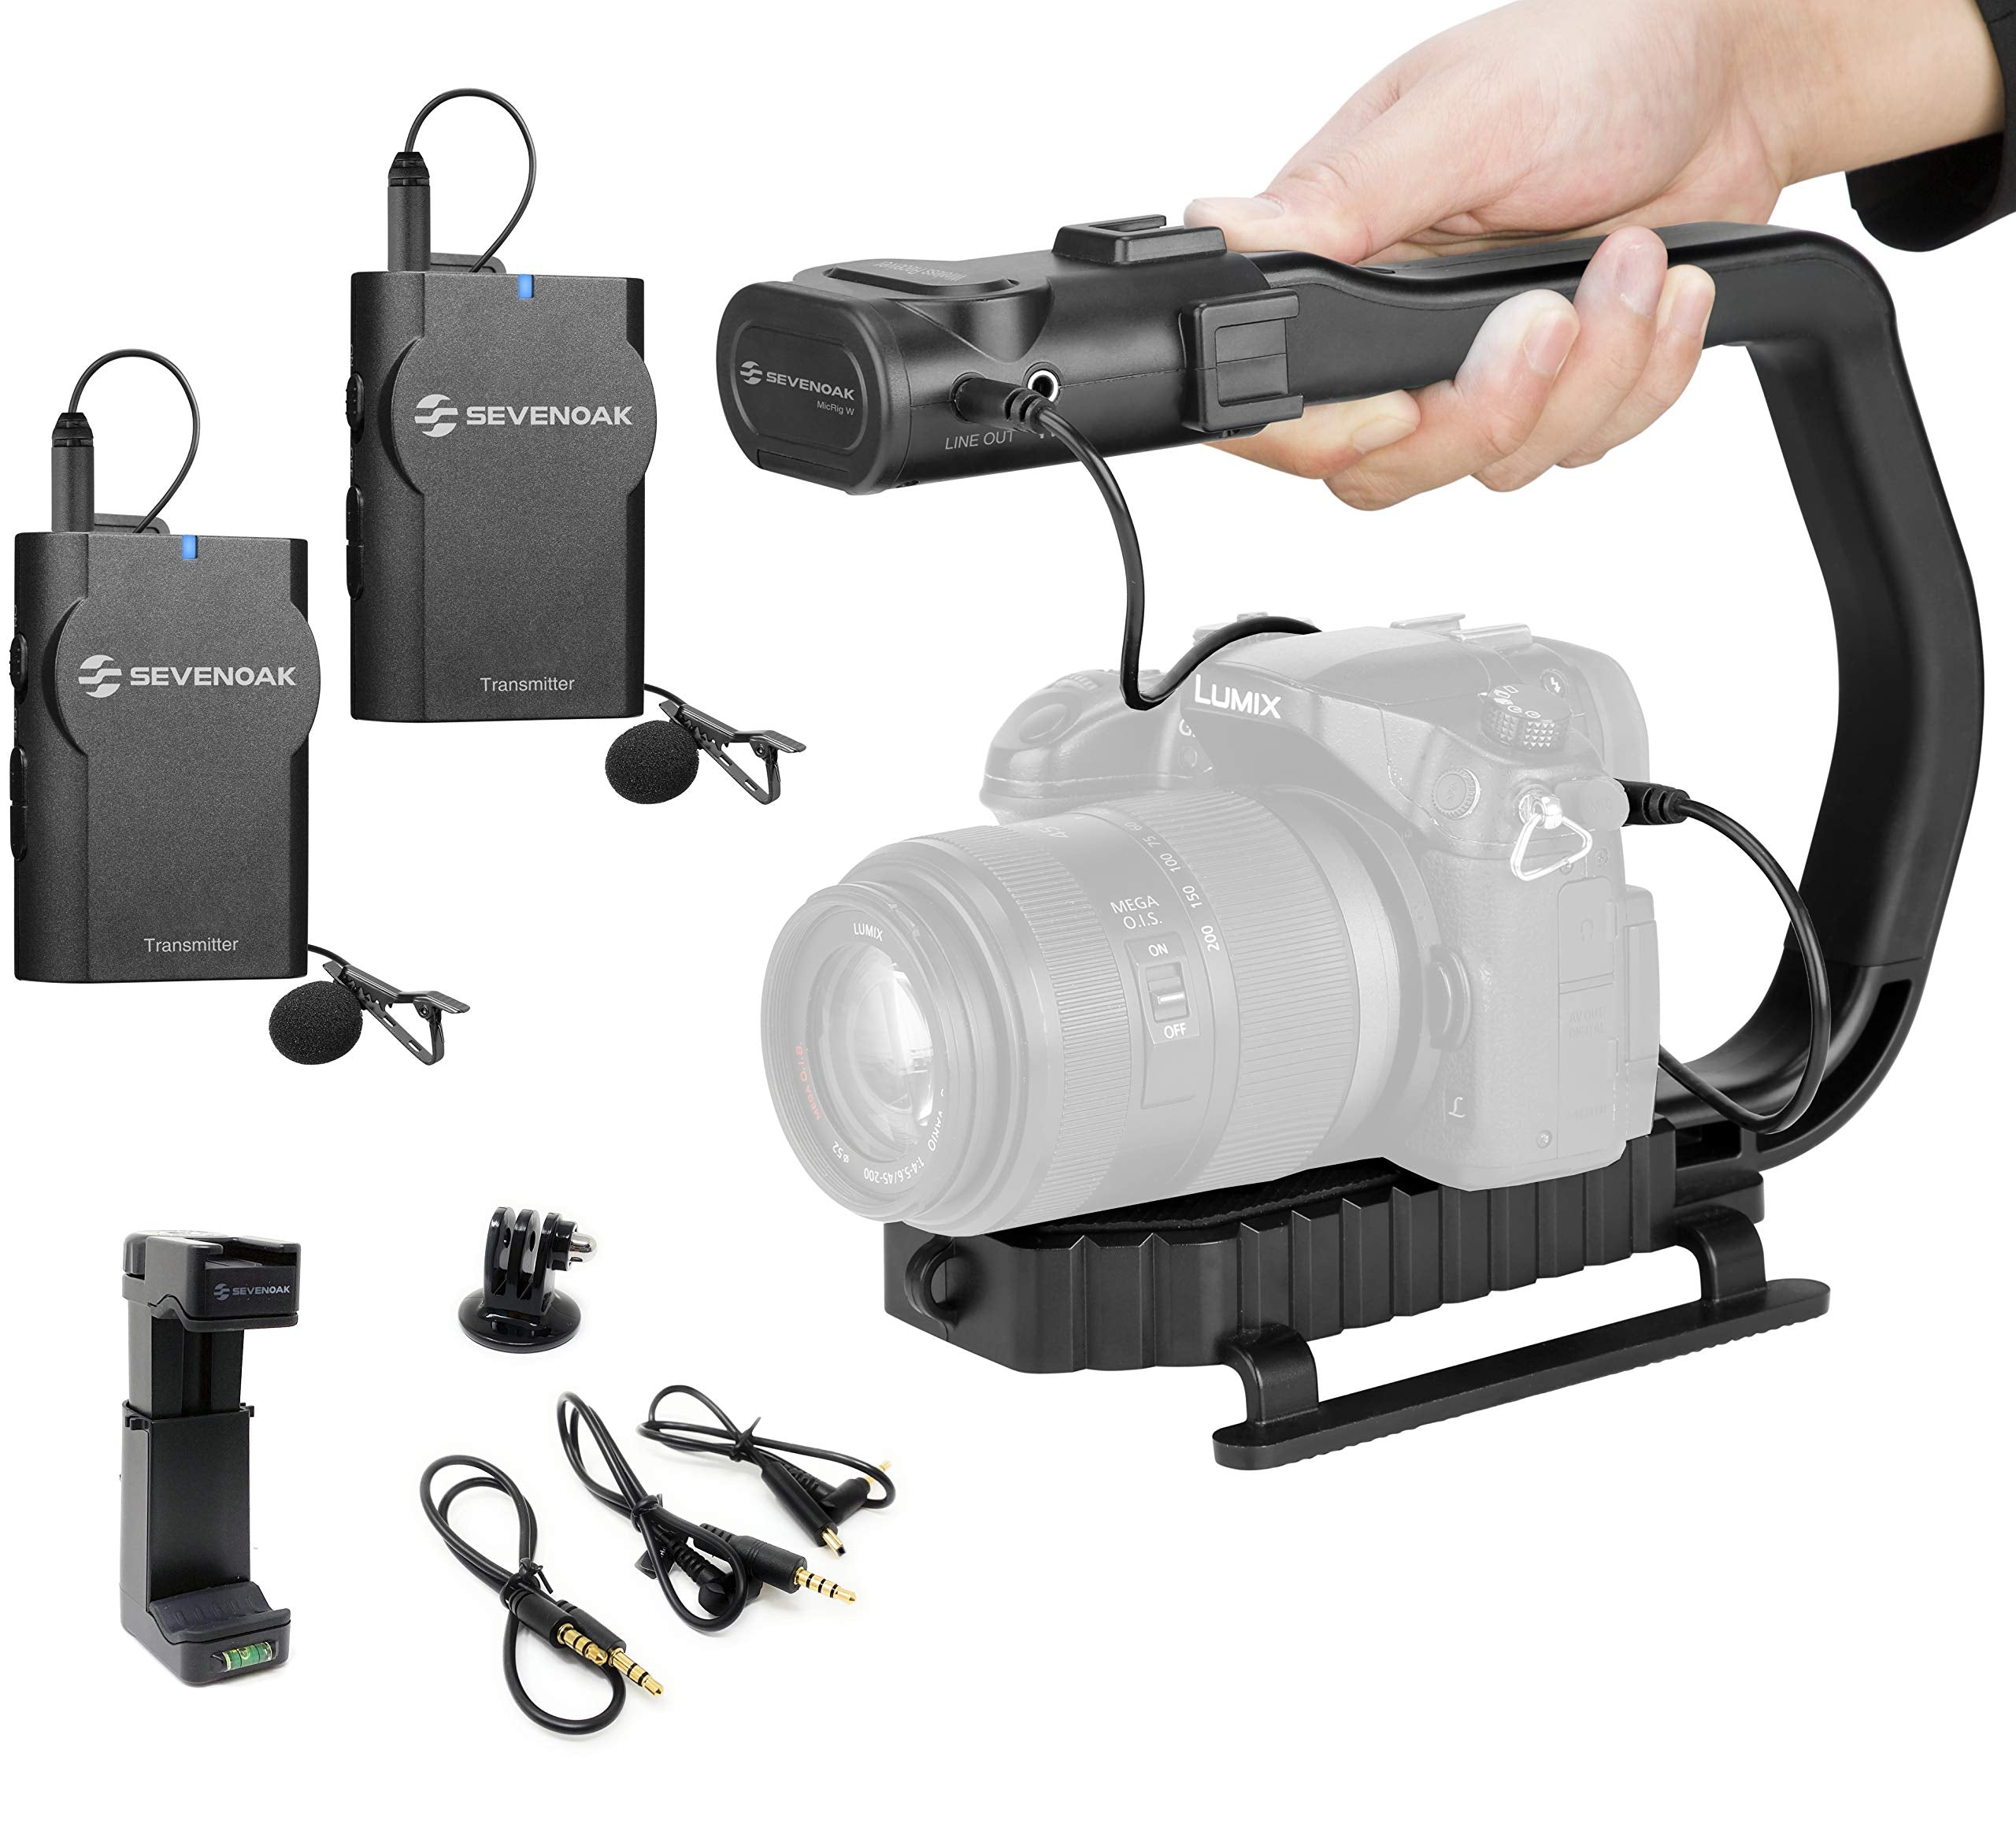 Movo MicRig-W2 Wireless Microphone Filmmaker Kit - Video Handle Stabilizer with Built-in Dual Wireless Lavalier Microphone Compatible with Canon EOS, Nikon, Sony, Panasonic DSLR and Mirrorless Cameras  - Acceptable